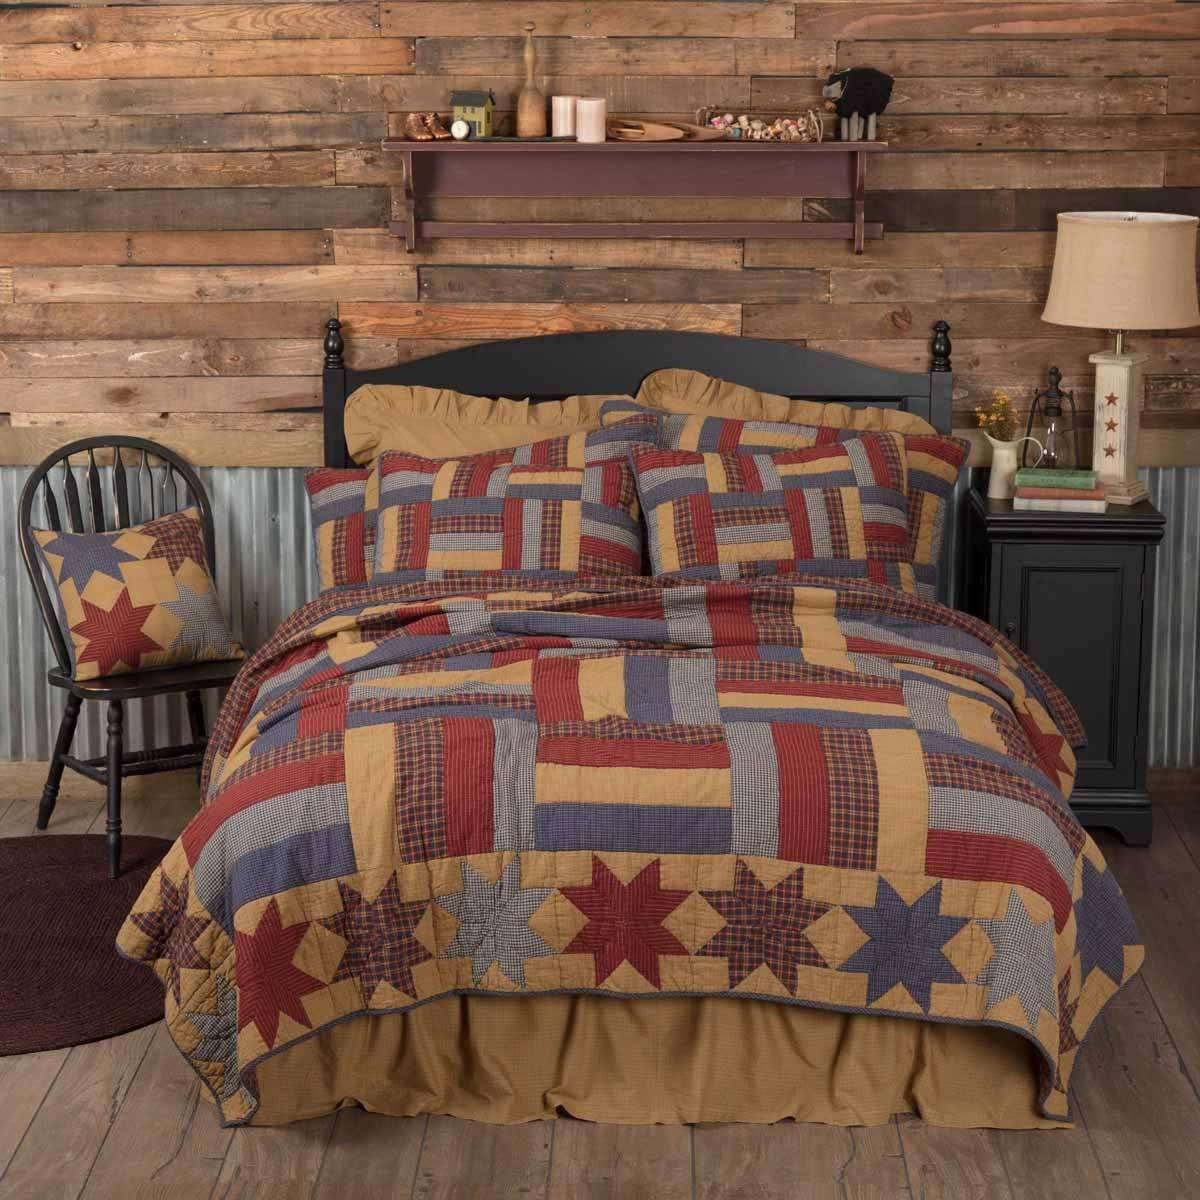 National Quilt Museum Kindred Stars and Bars Luxury King Quilt 120Wx105L VHC Brands online